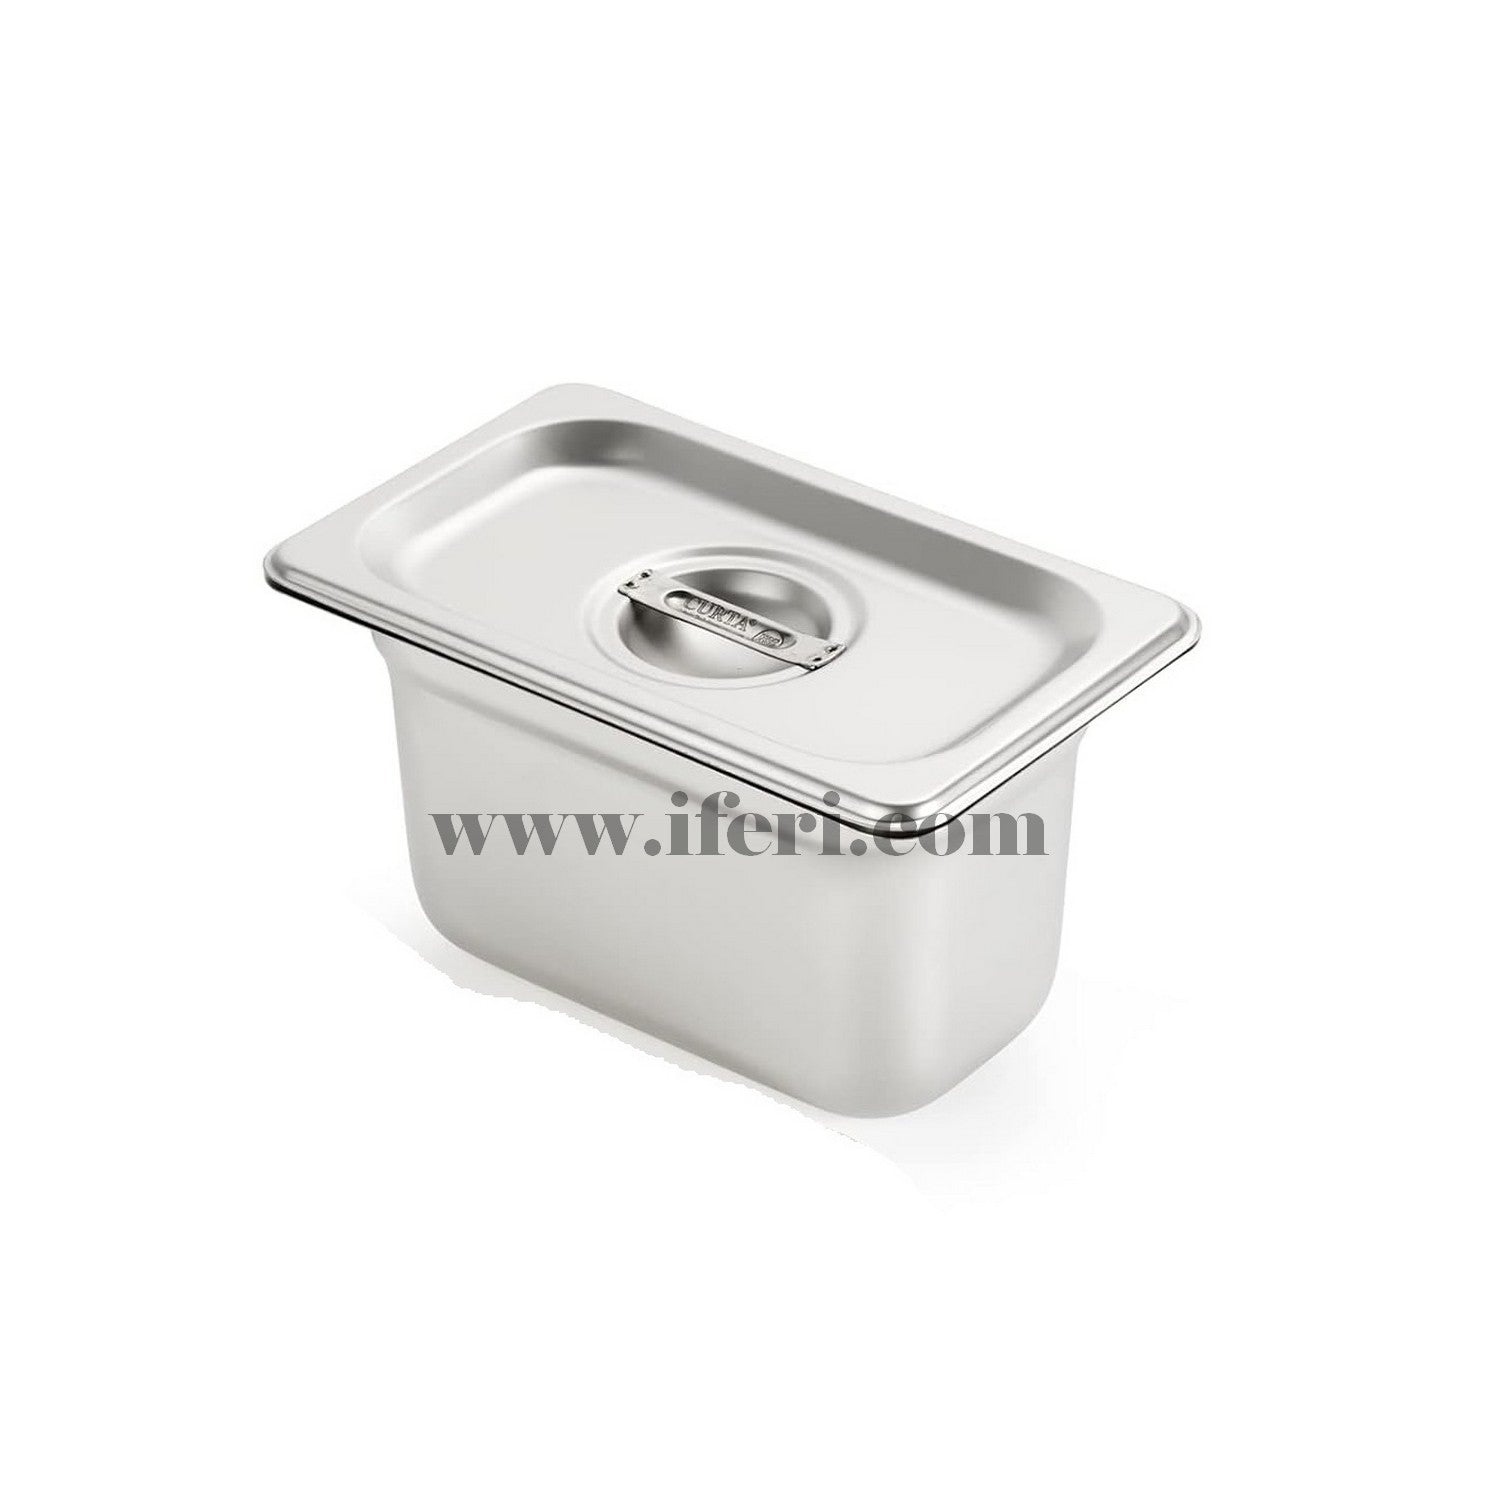 7 inch 1/9 Stainless Steel Deep 6 inch food Pan EB1/9-6